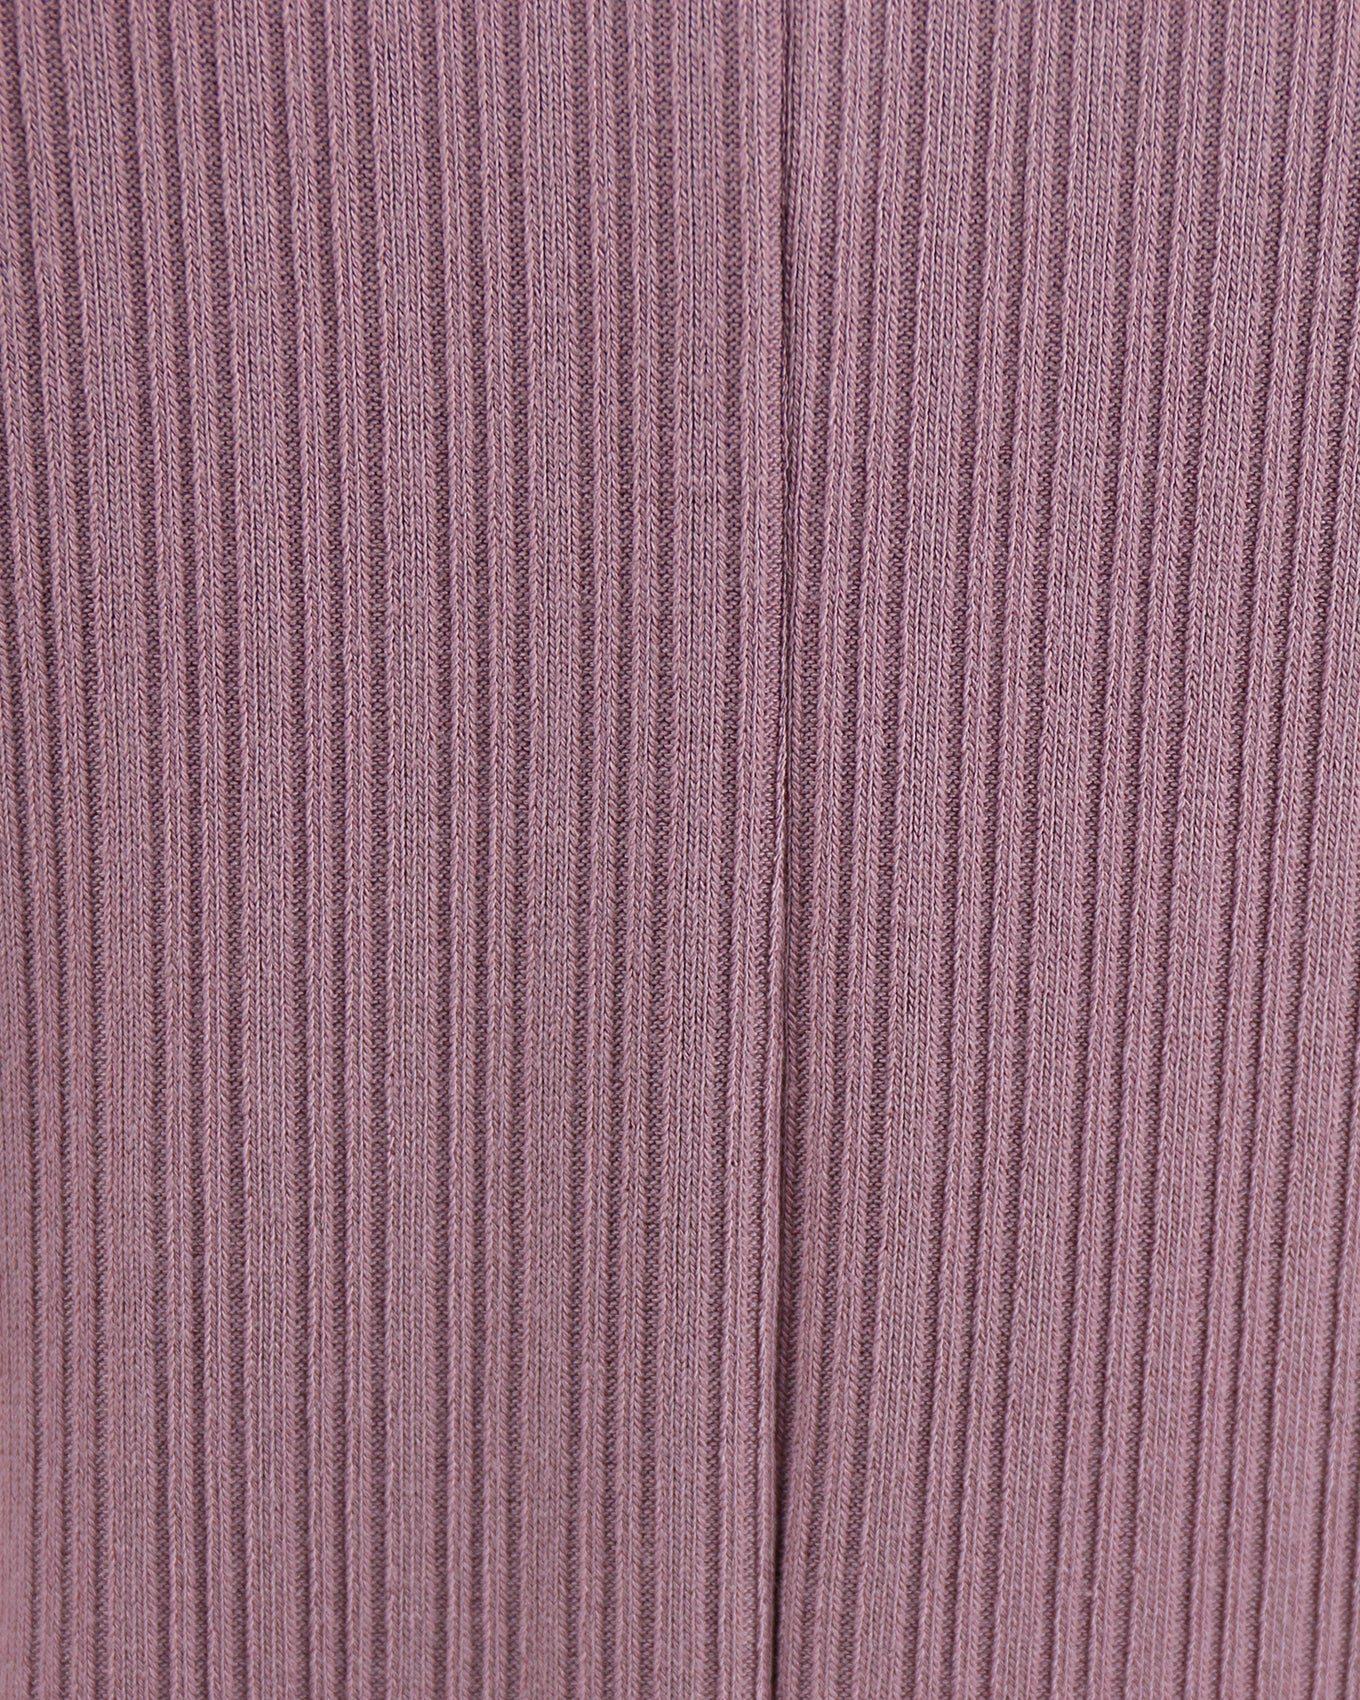 Fabric view of Dark Lilac Coziest Dolman Lounge Top